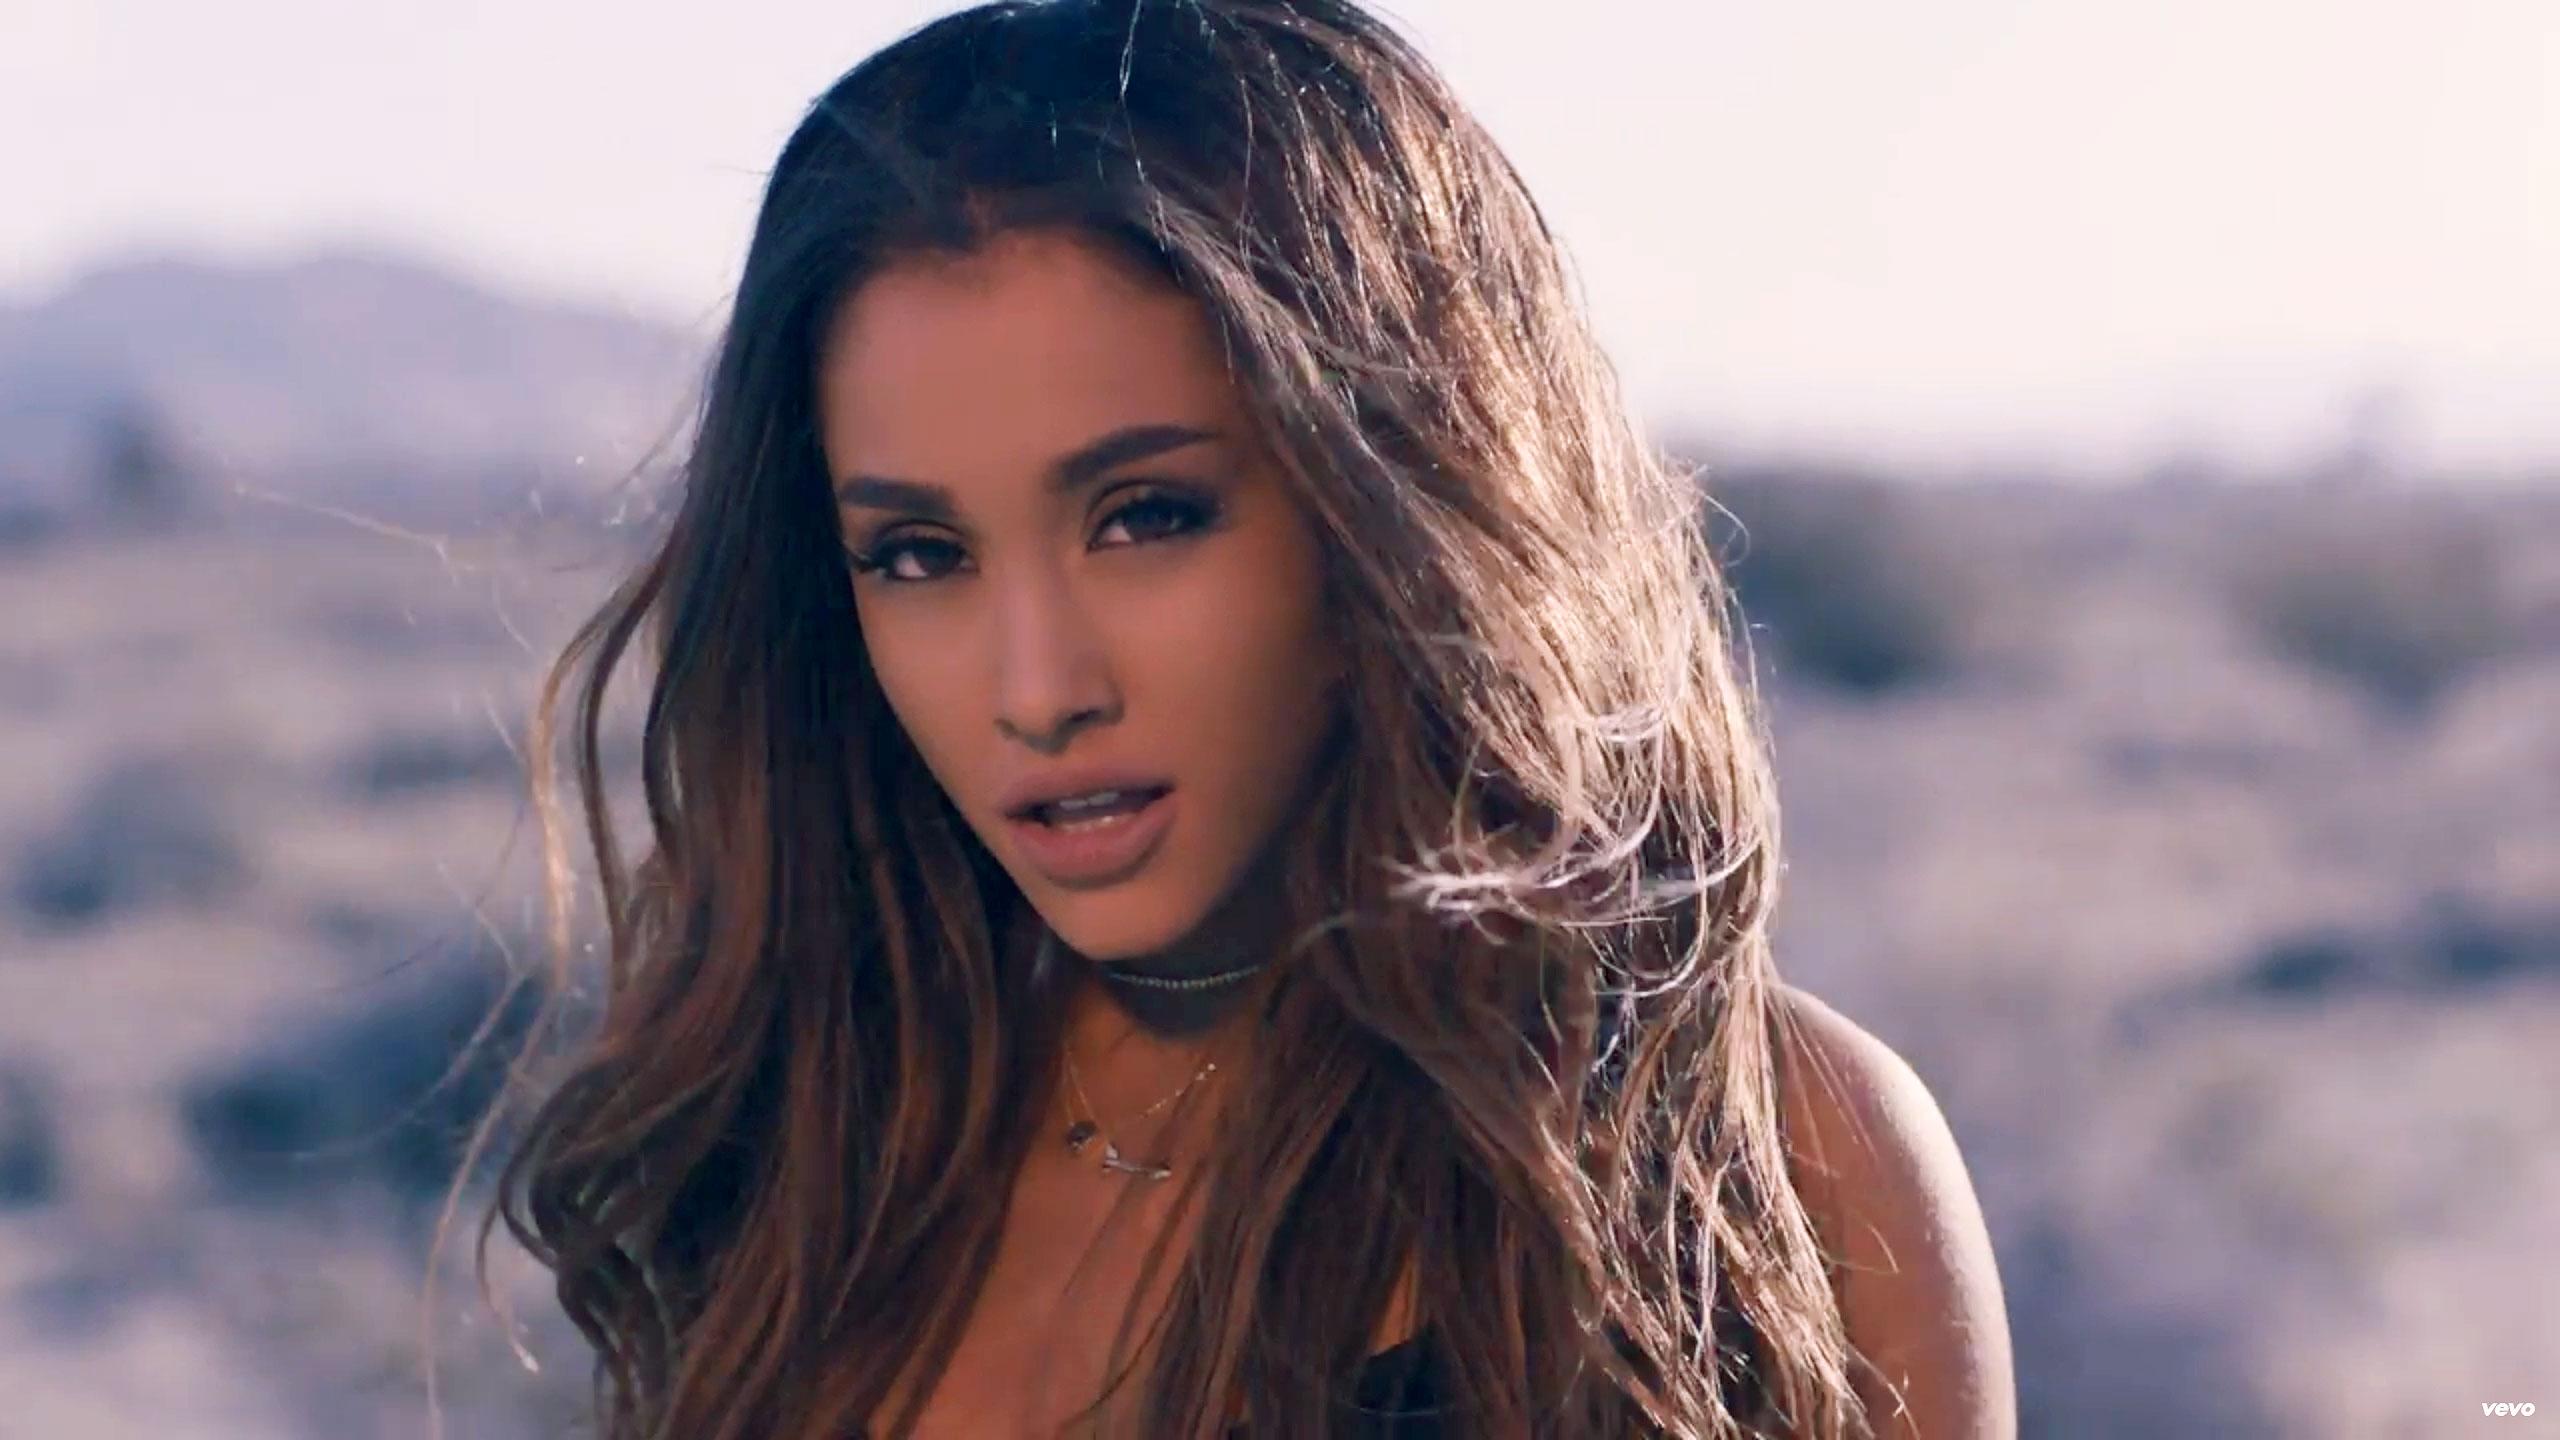 breathing ariana grande mp3 free download